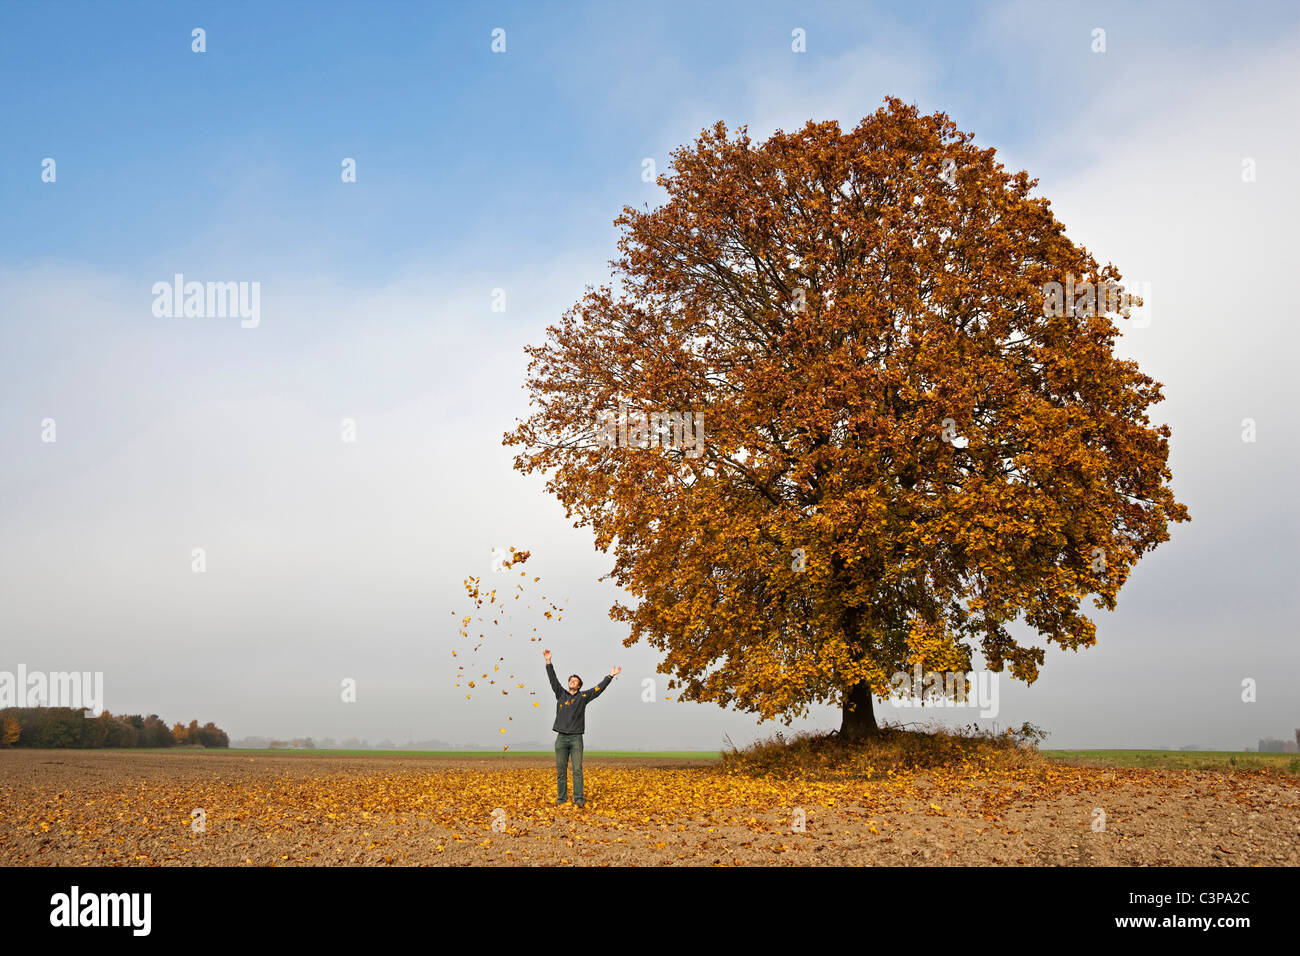 Germany, Bavaria, Man throwing leaves into air Stock Photo